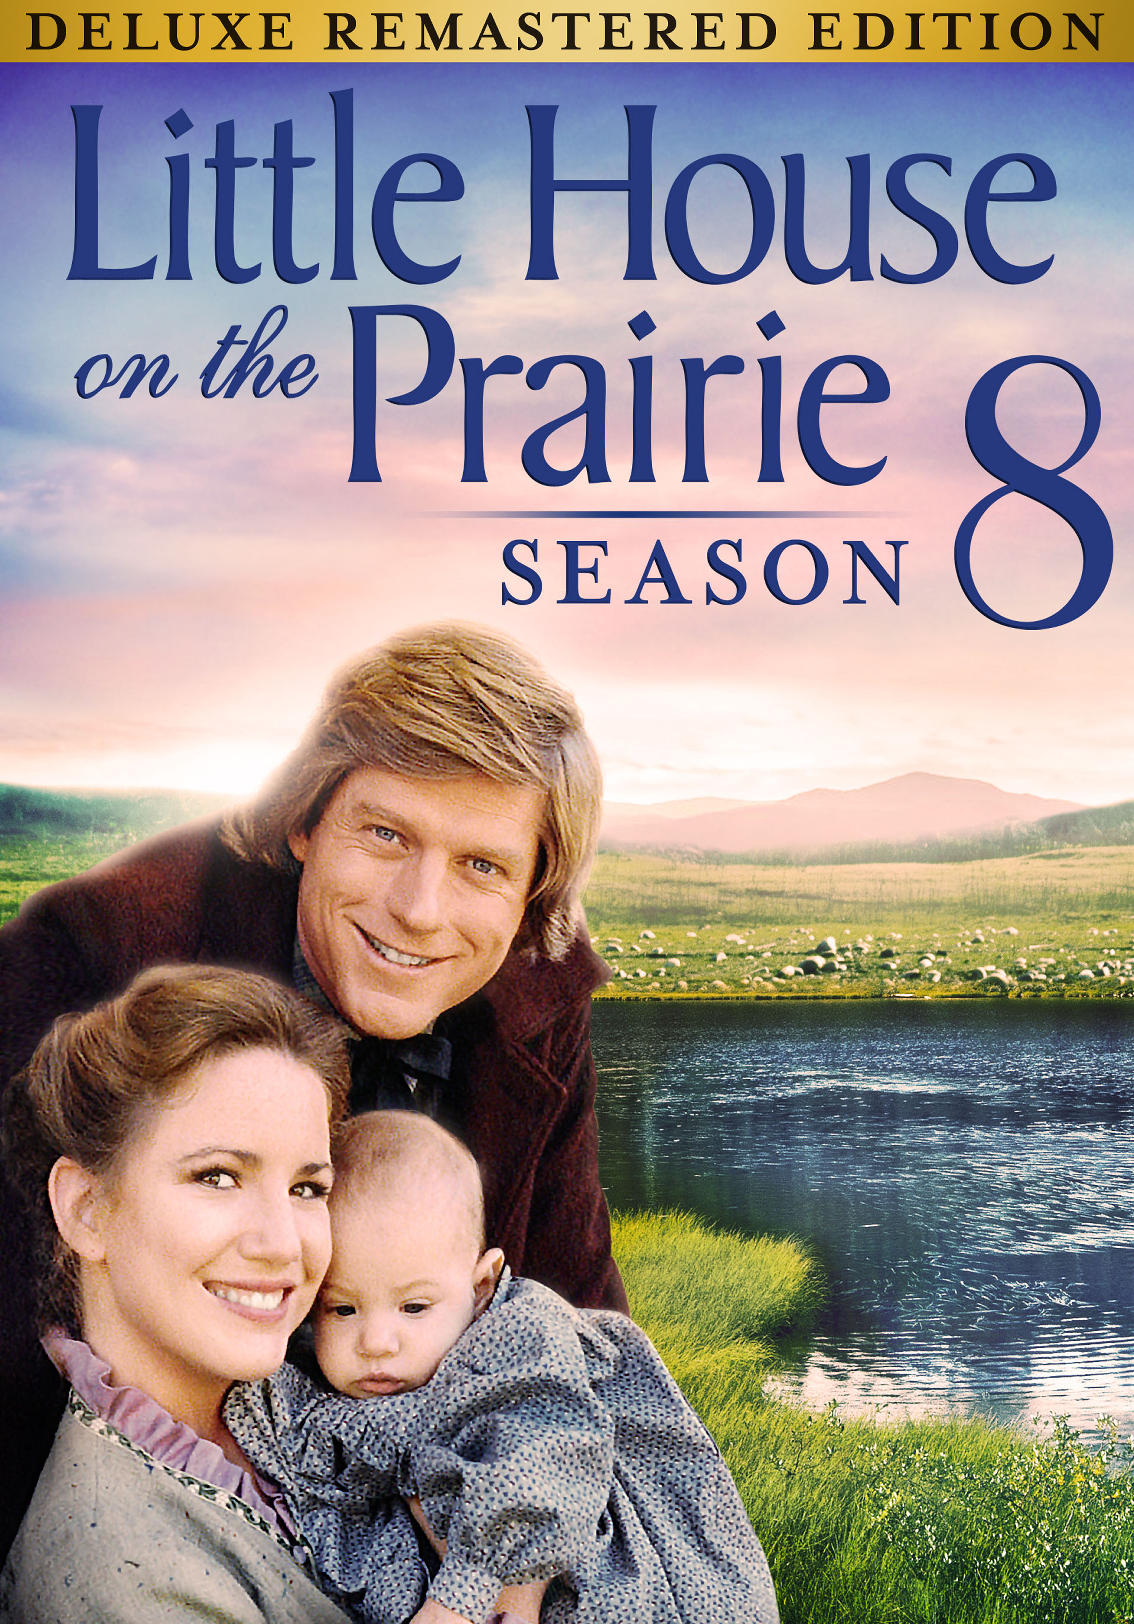 little house on the prairie complete series download torrent